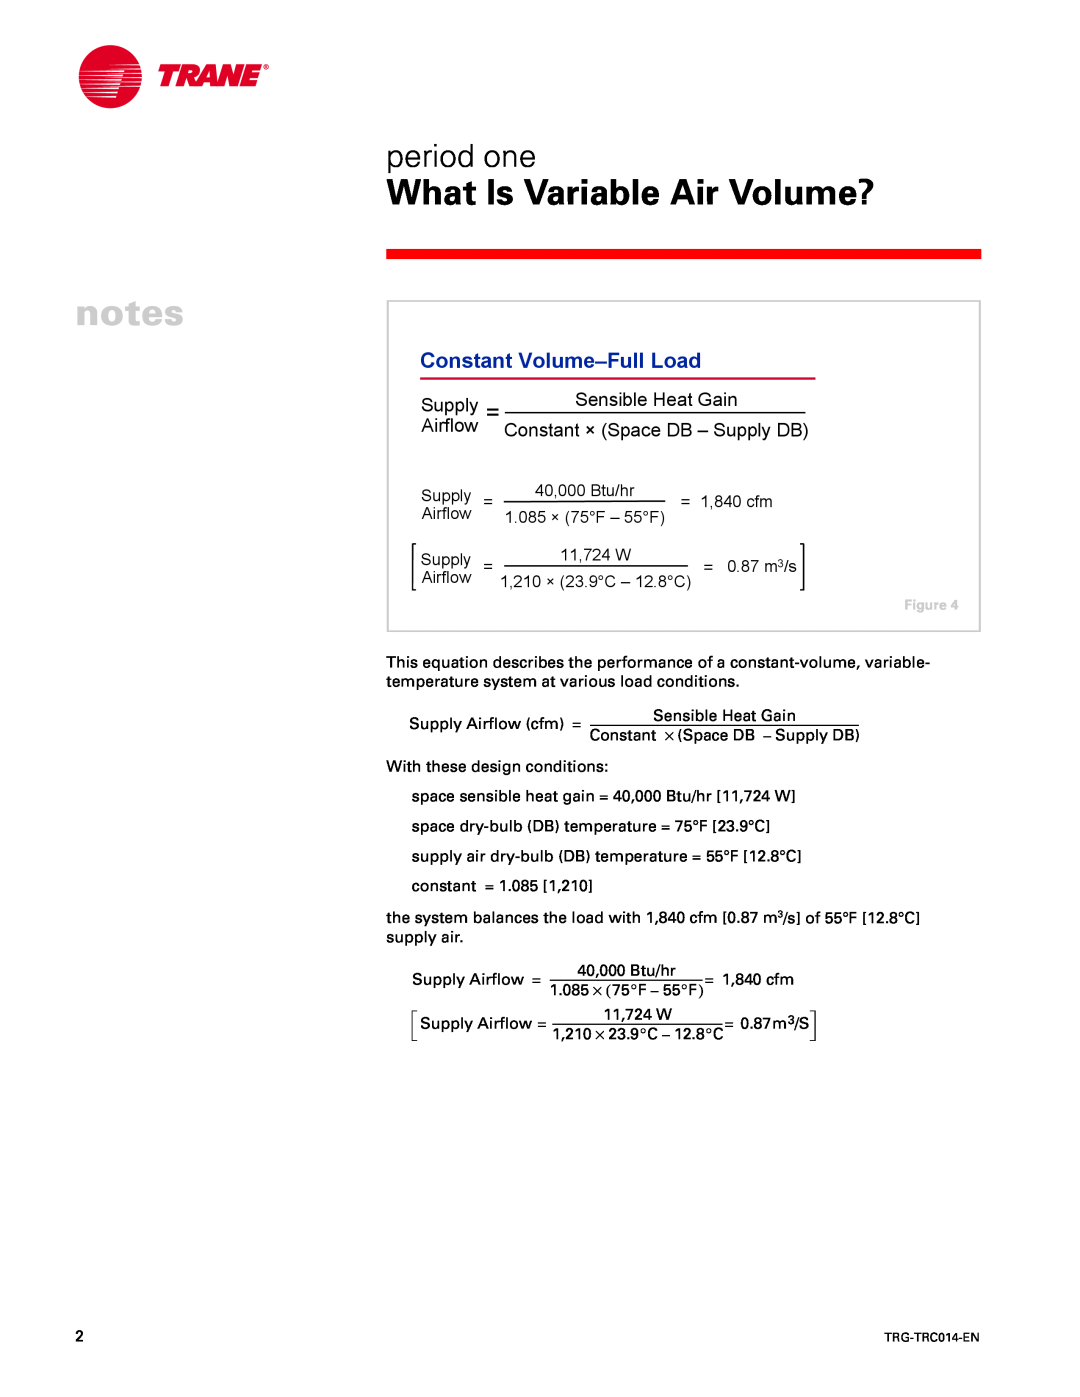 Trane TRG-TRC014-EN manual period one, Constant Volume-FullLoad, What Is Variable Air Volume? 